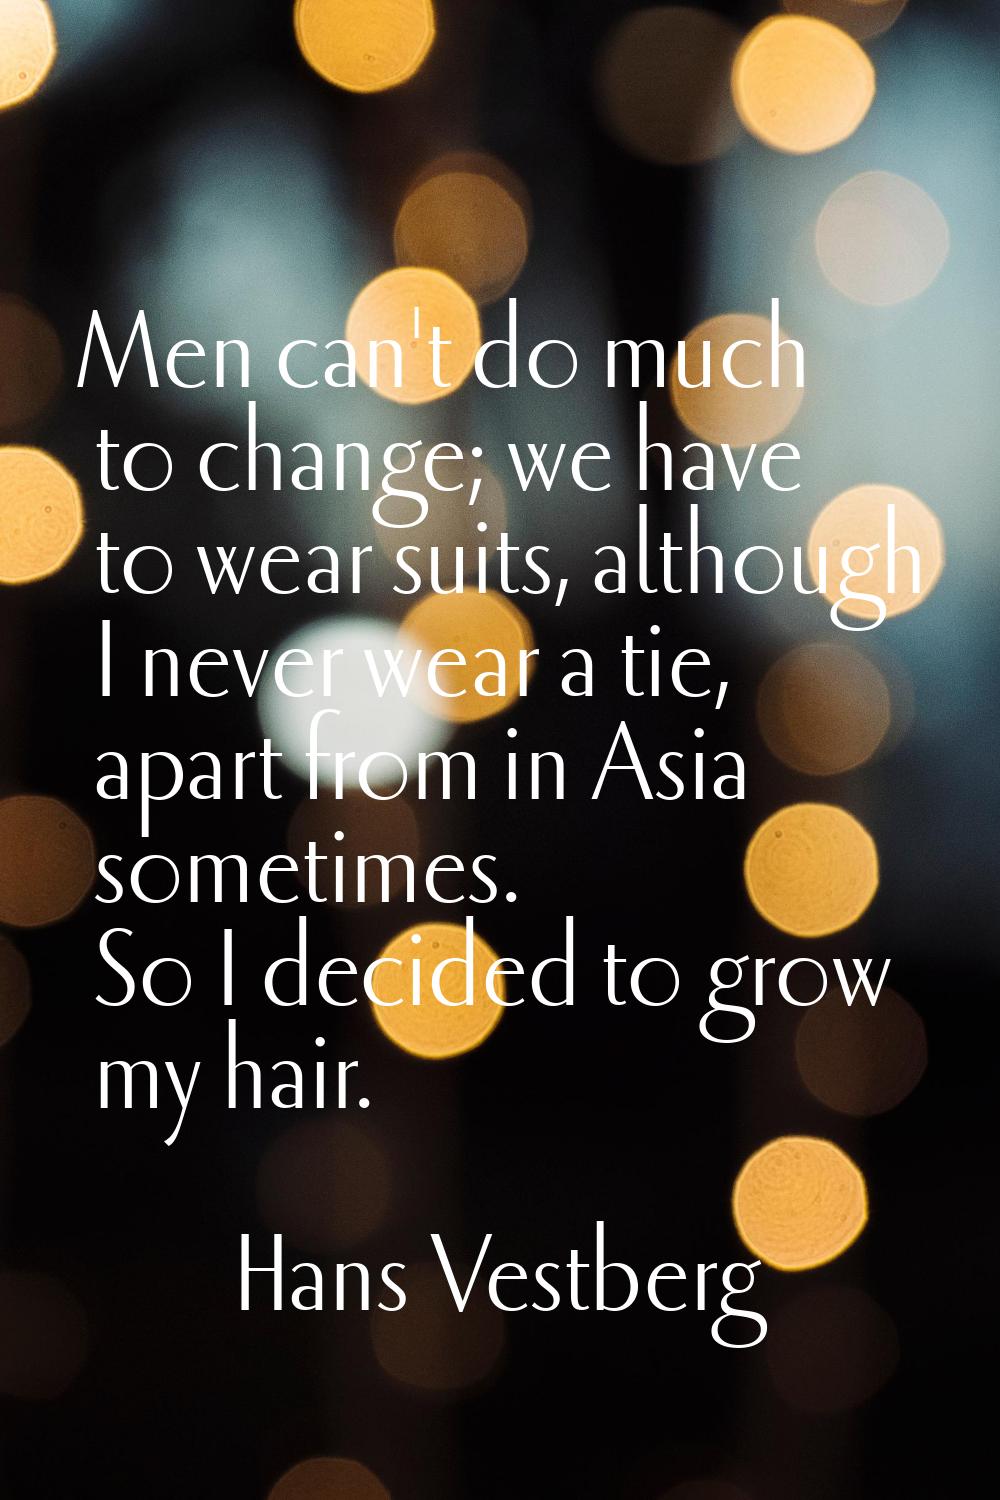 Men can't do much to change; we have to wear suits, although I never wear a tie, apart from in Asia